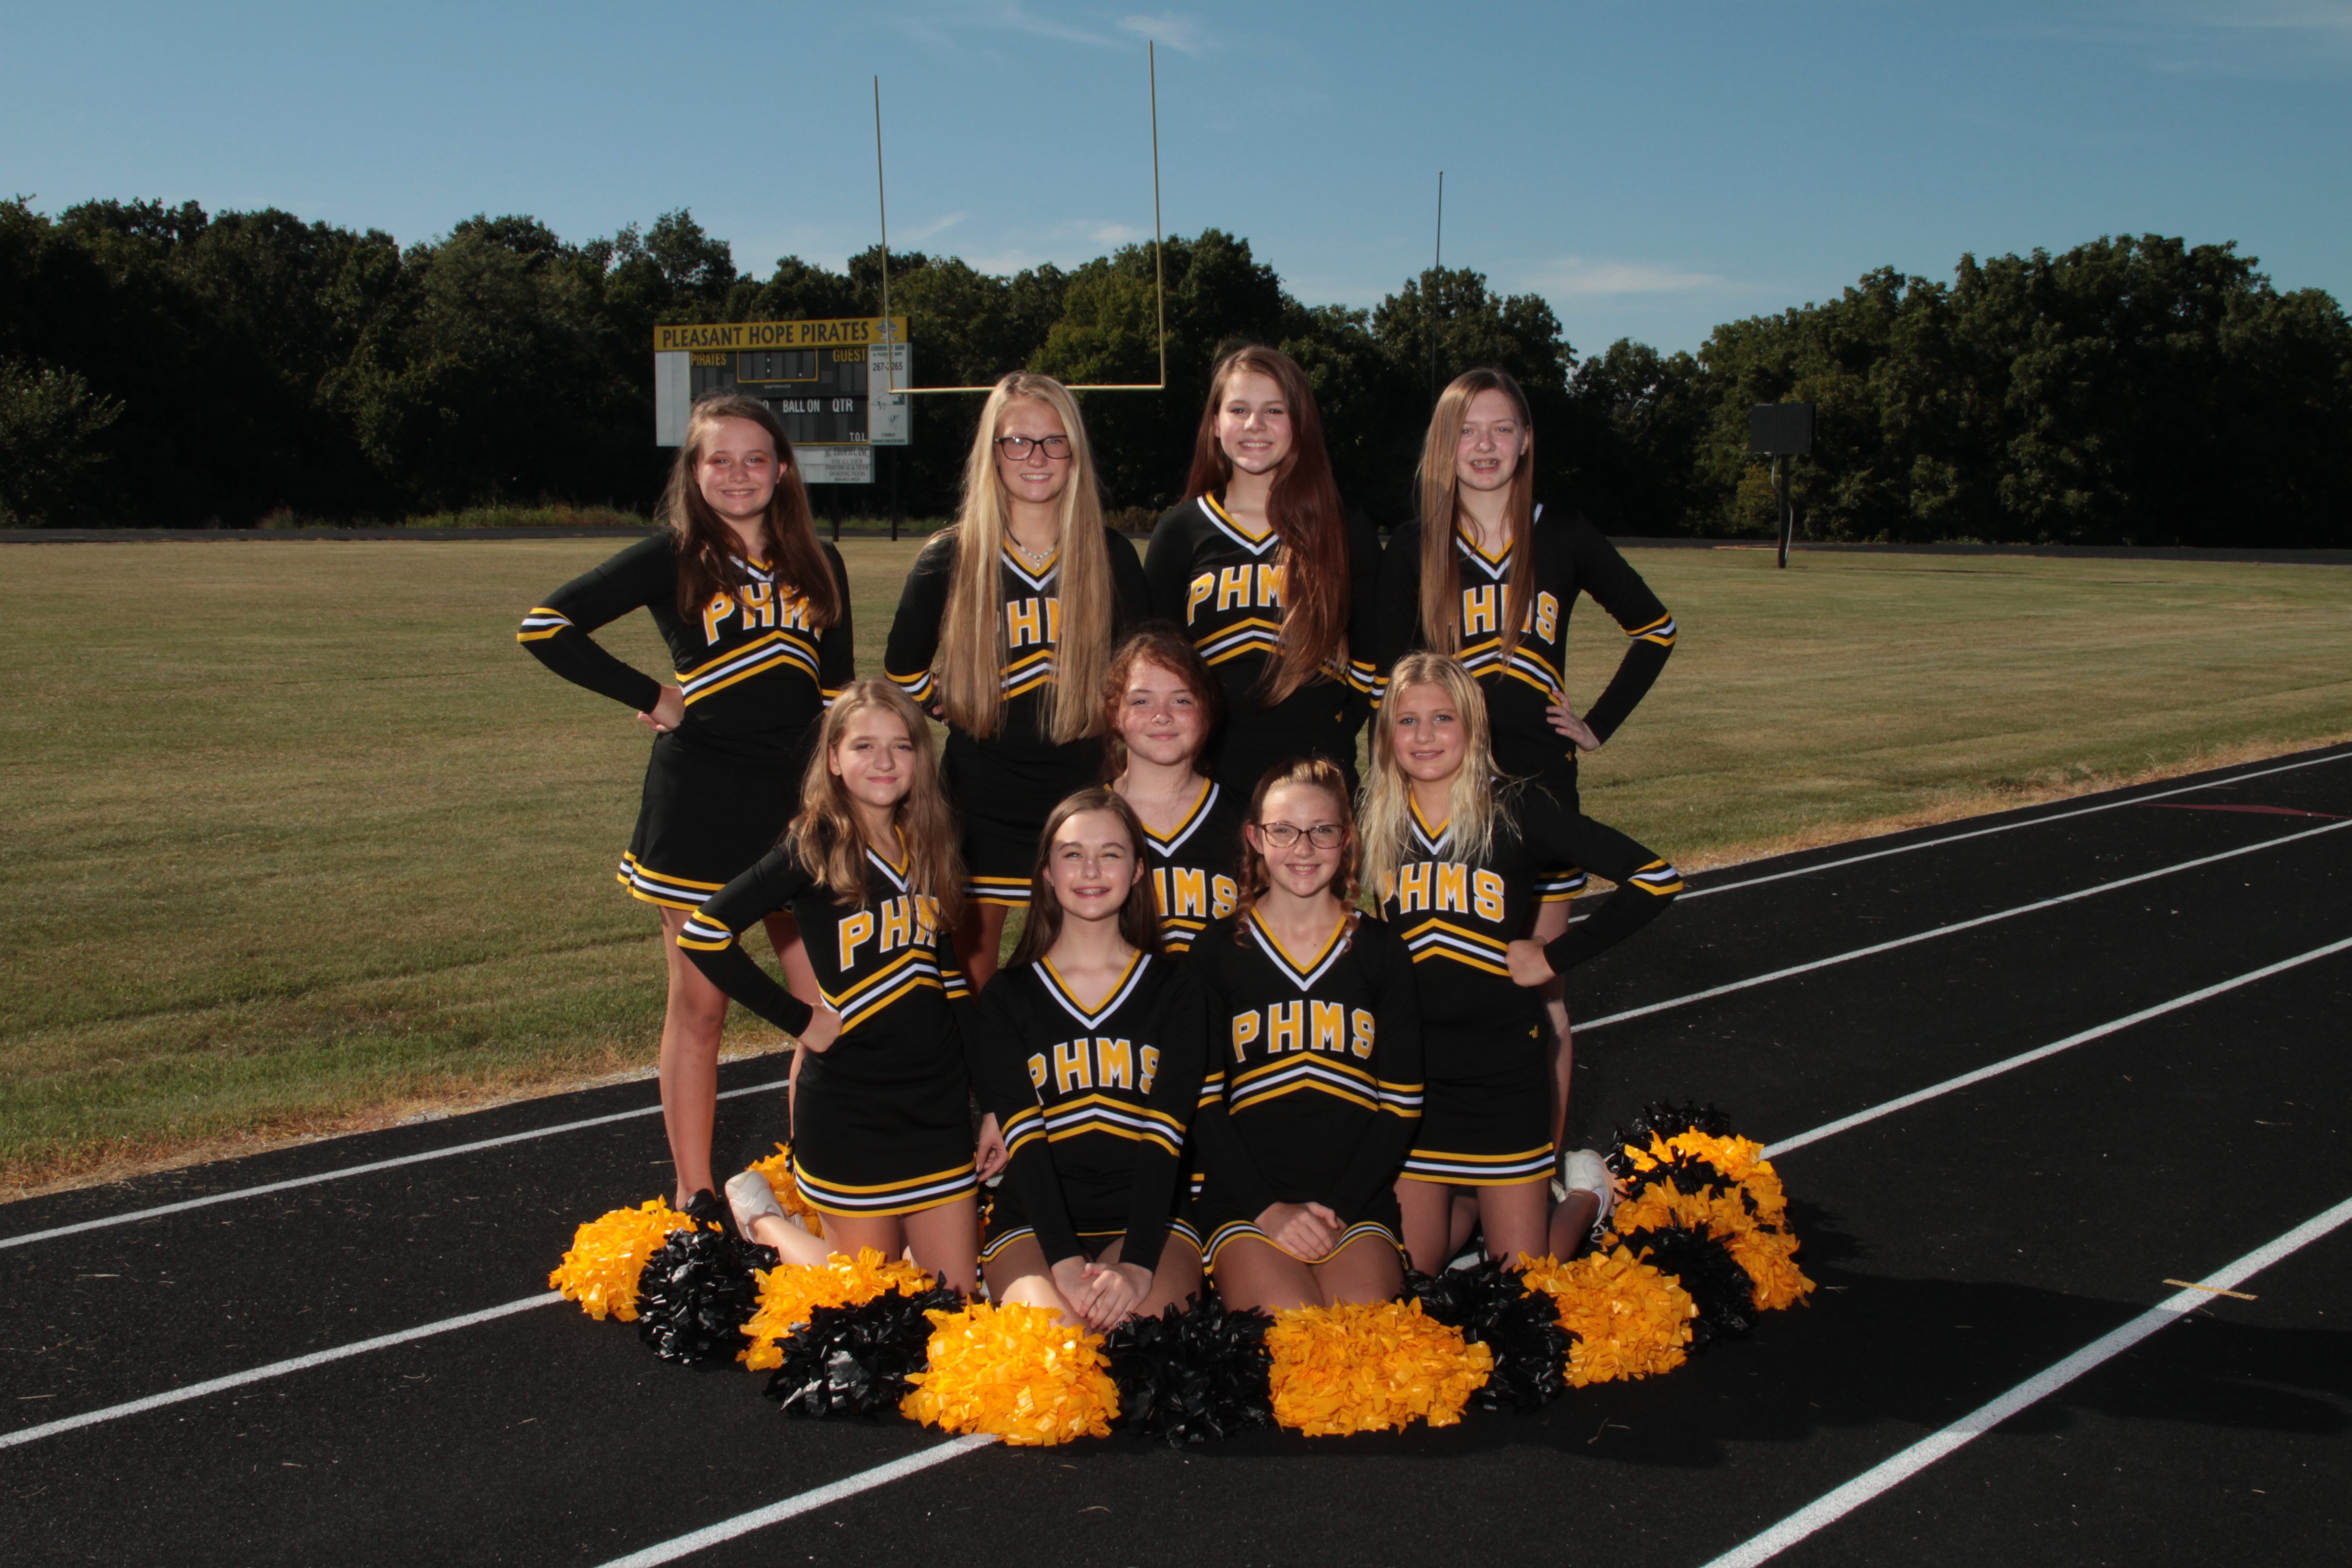 MS Cheer Team Picture